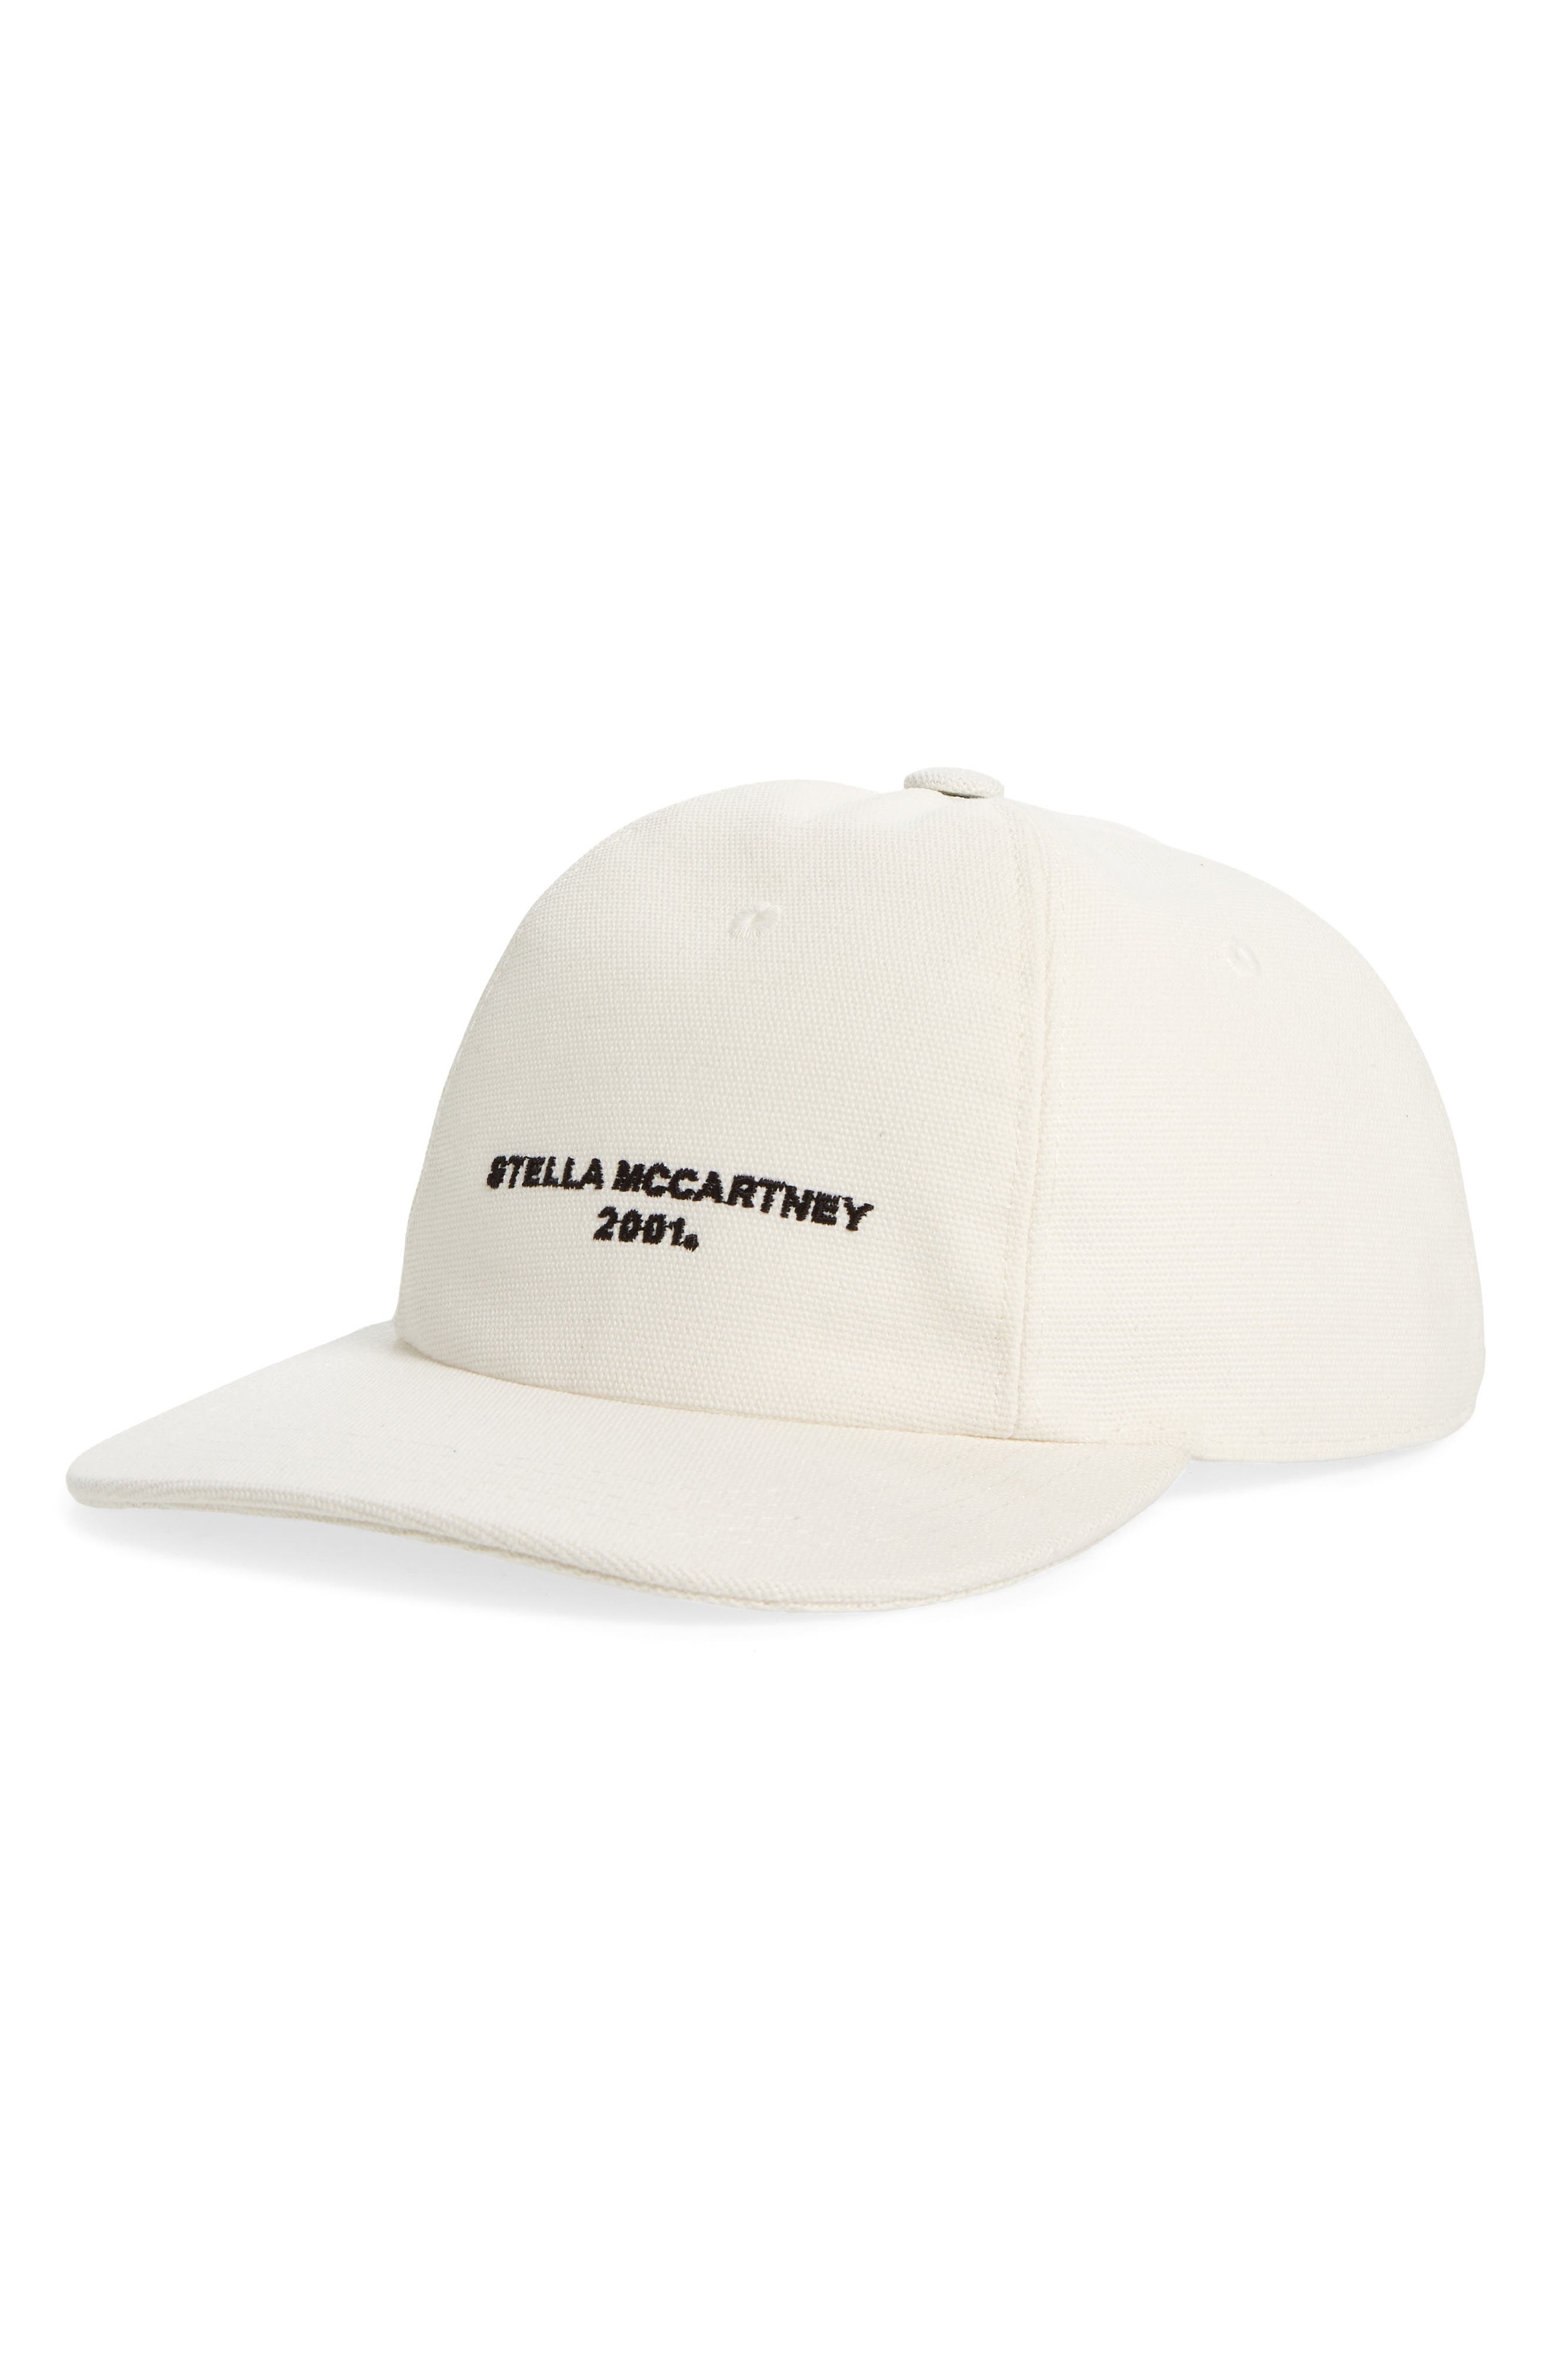 Stella McCartney Embroidered Logo Cotton Baseball Cap in Frost